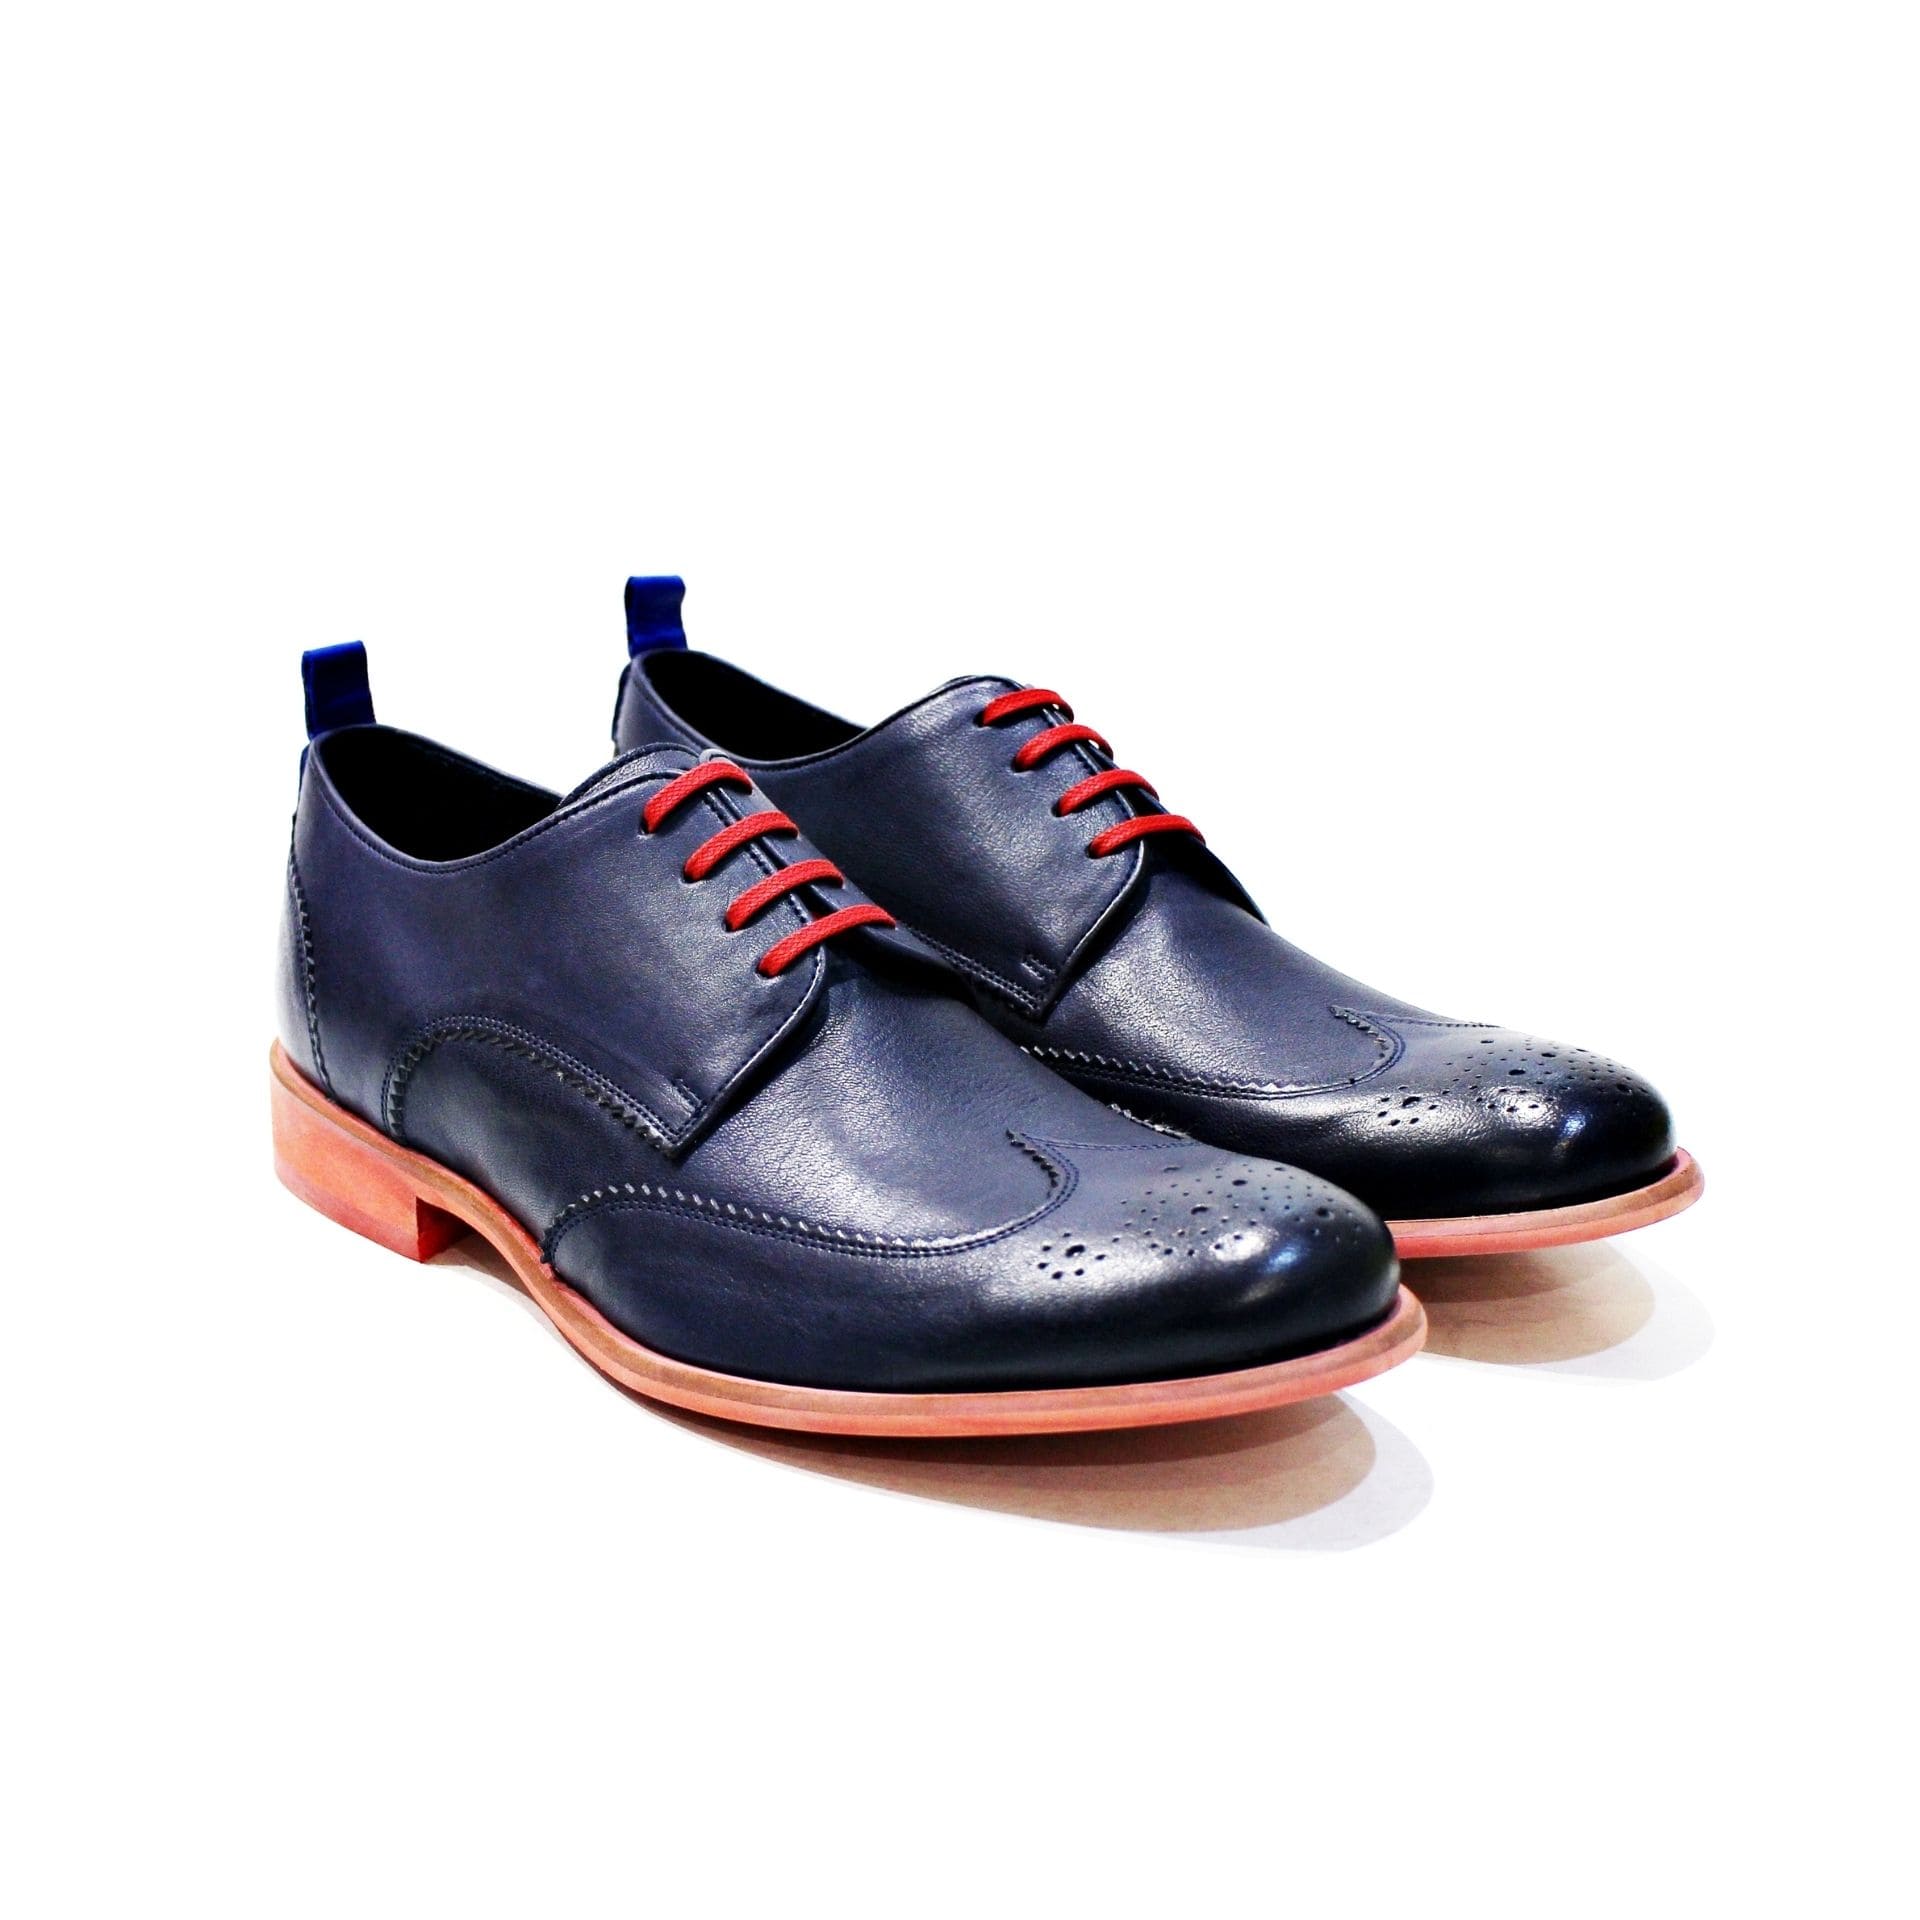 Shoe consisting of leather inwardly and externally, with red rubber sole. “Walk with Pintta”